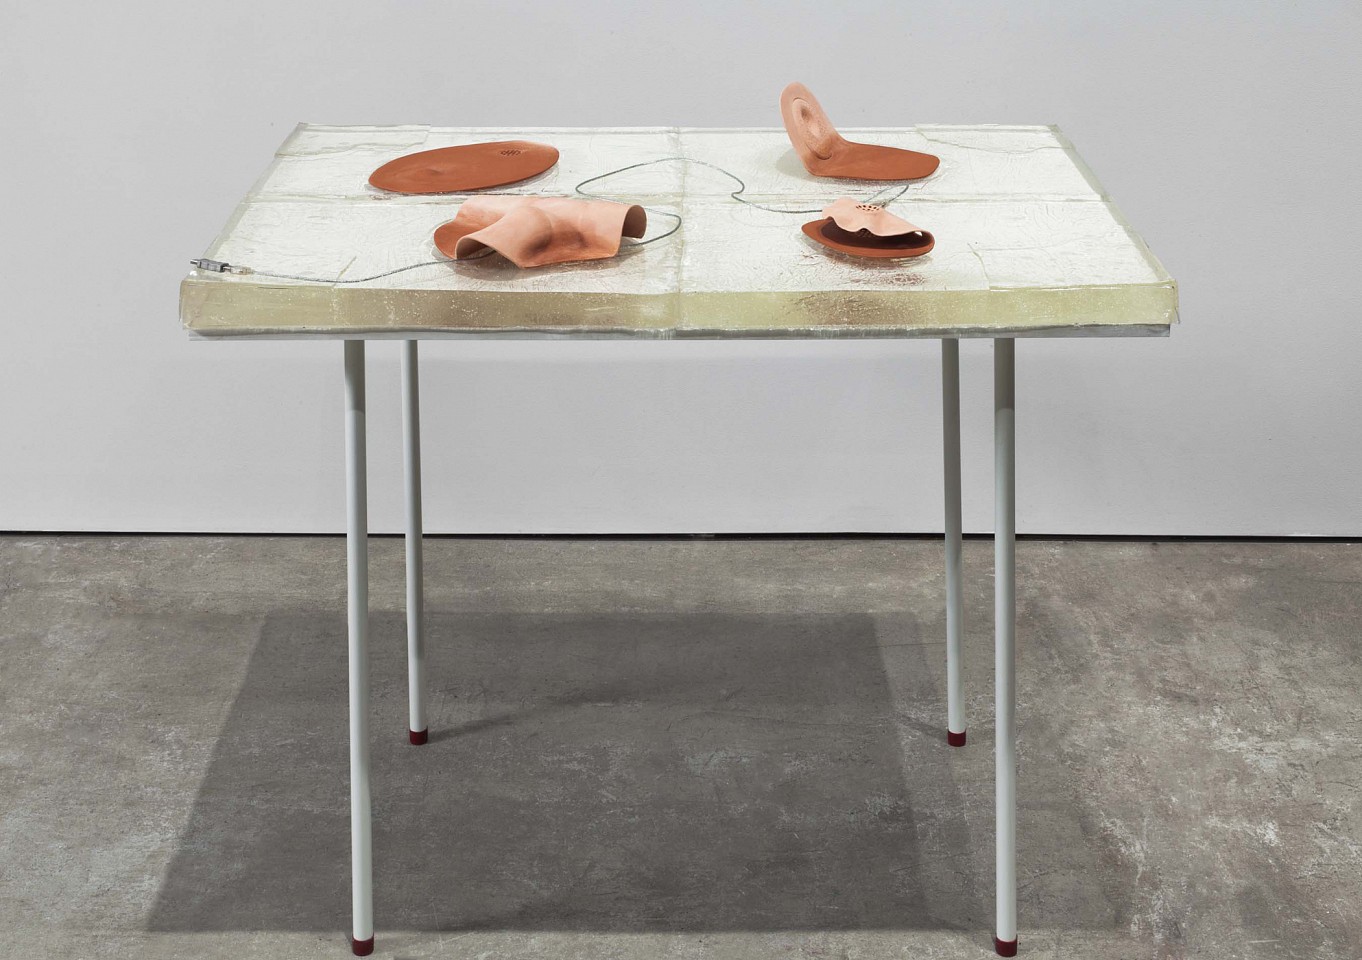 Alisa Baremboym
Leakage Industries: Clear Conduit, 2012
Gelled emollient, unglazed ceramic, usb cable with gender changers, flash drive, hardware, 40 x 32 x 48 in.